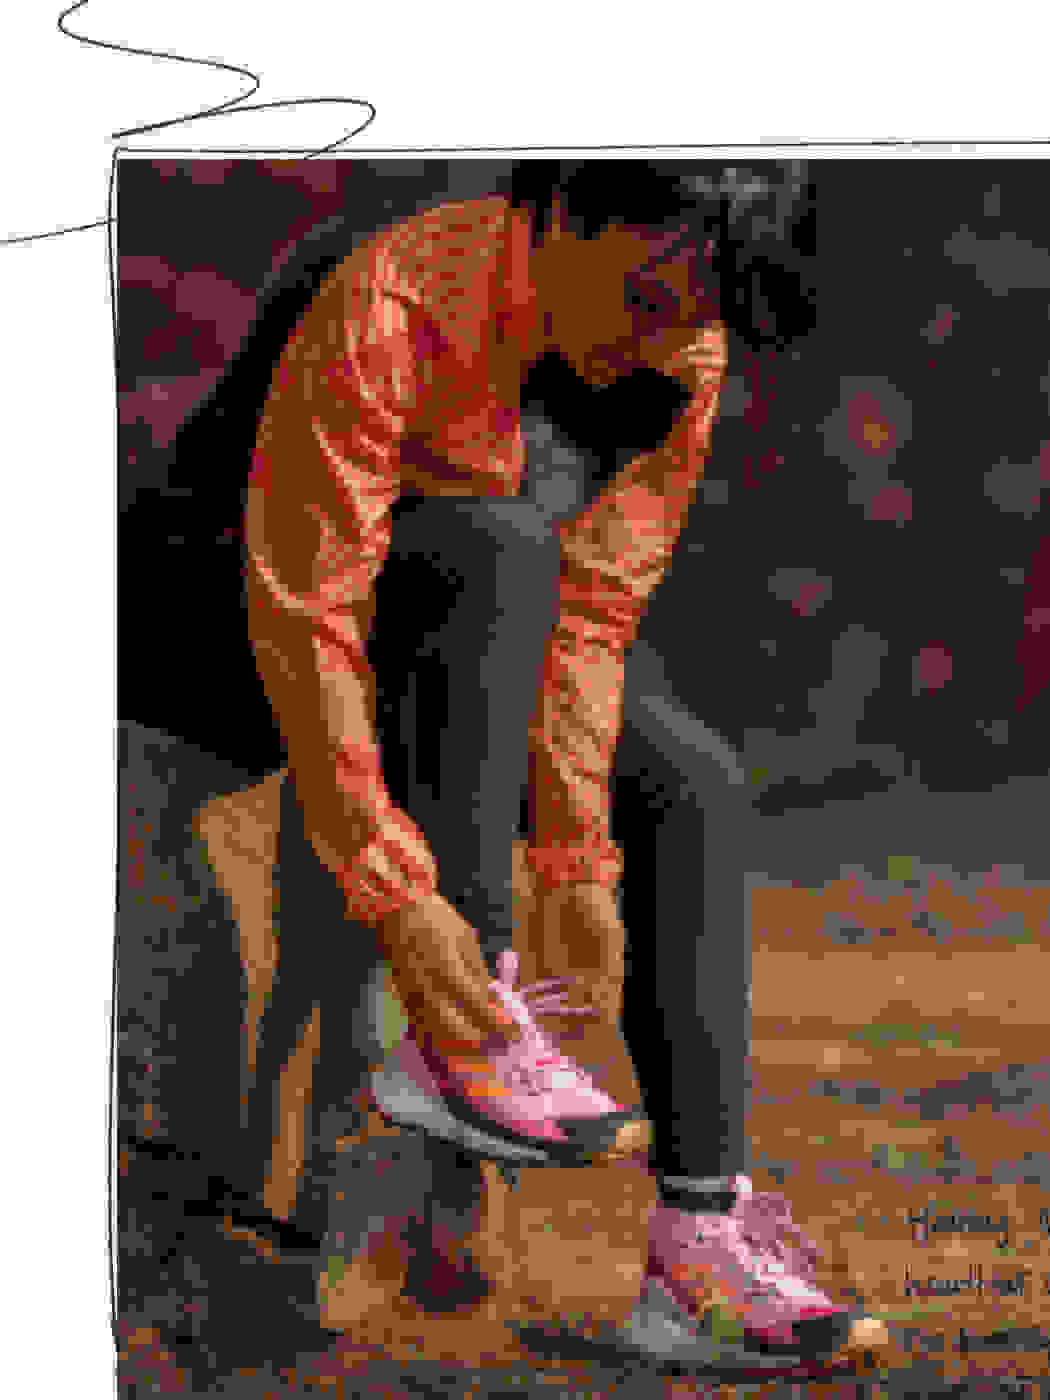 One person tieing their shoelaces while sitting on a rock, wearing the Breast Cancer Awareness Collection running jacket and leggings.